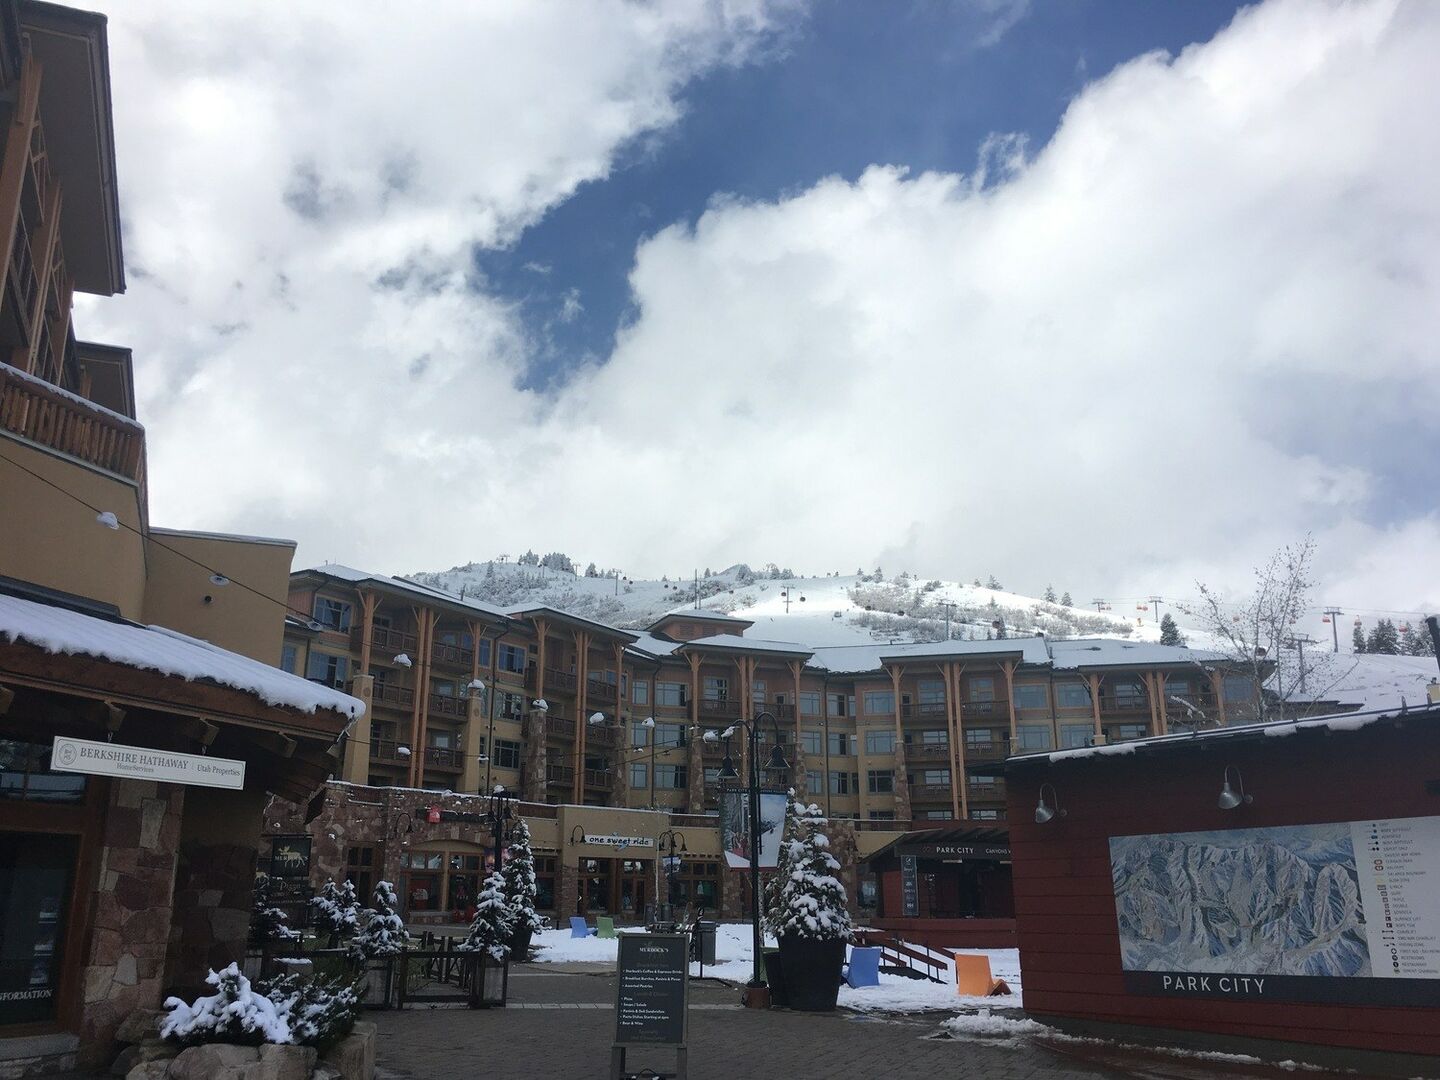 besides the resort ski shop, rentals and ski school Sundial also houses Murdock's Cafe & SmartWool, with the Umbrella bar right outside as well